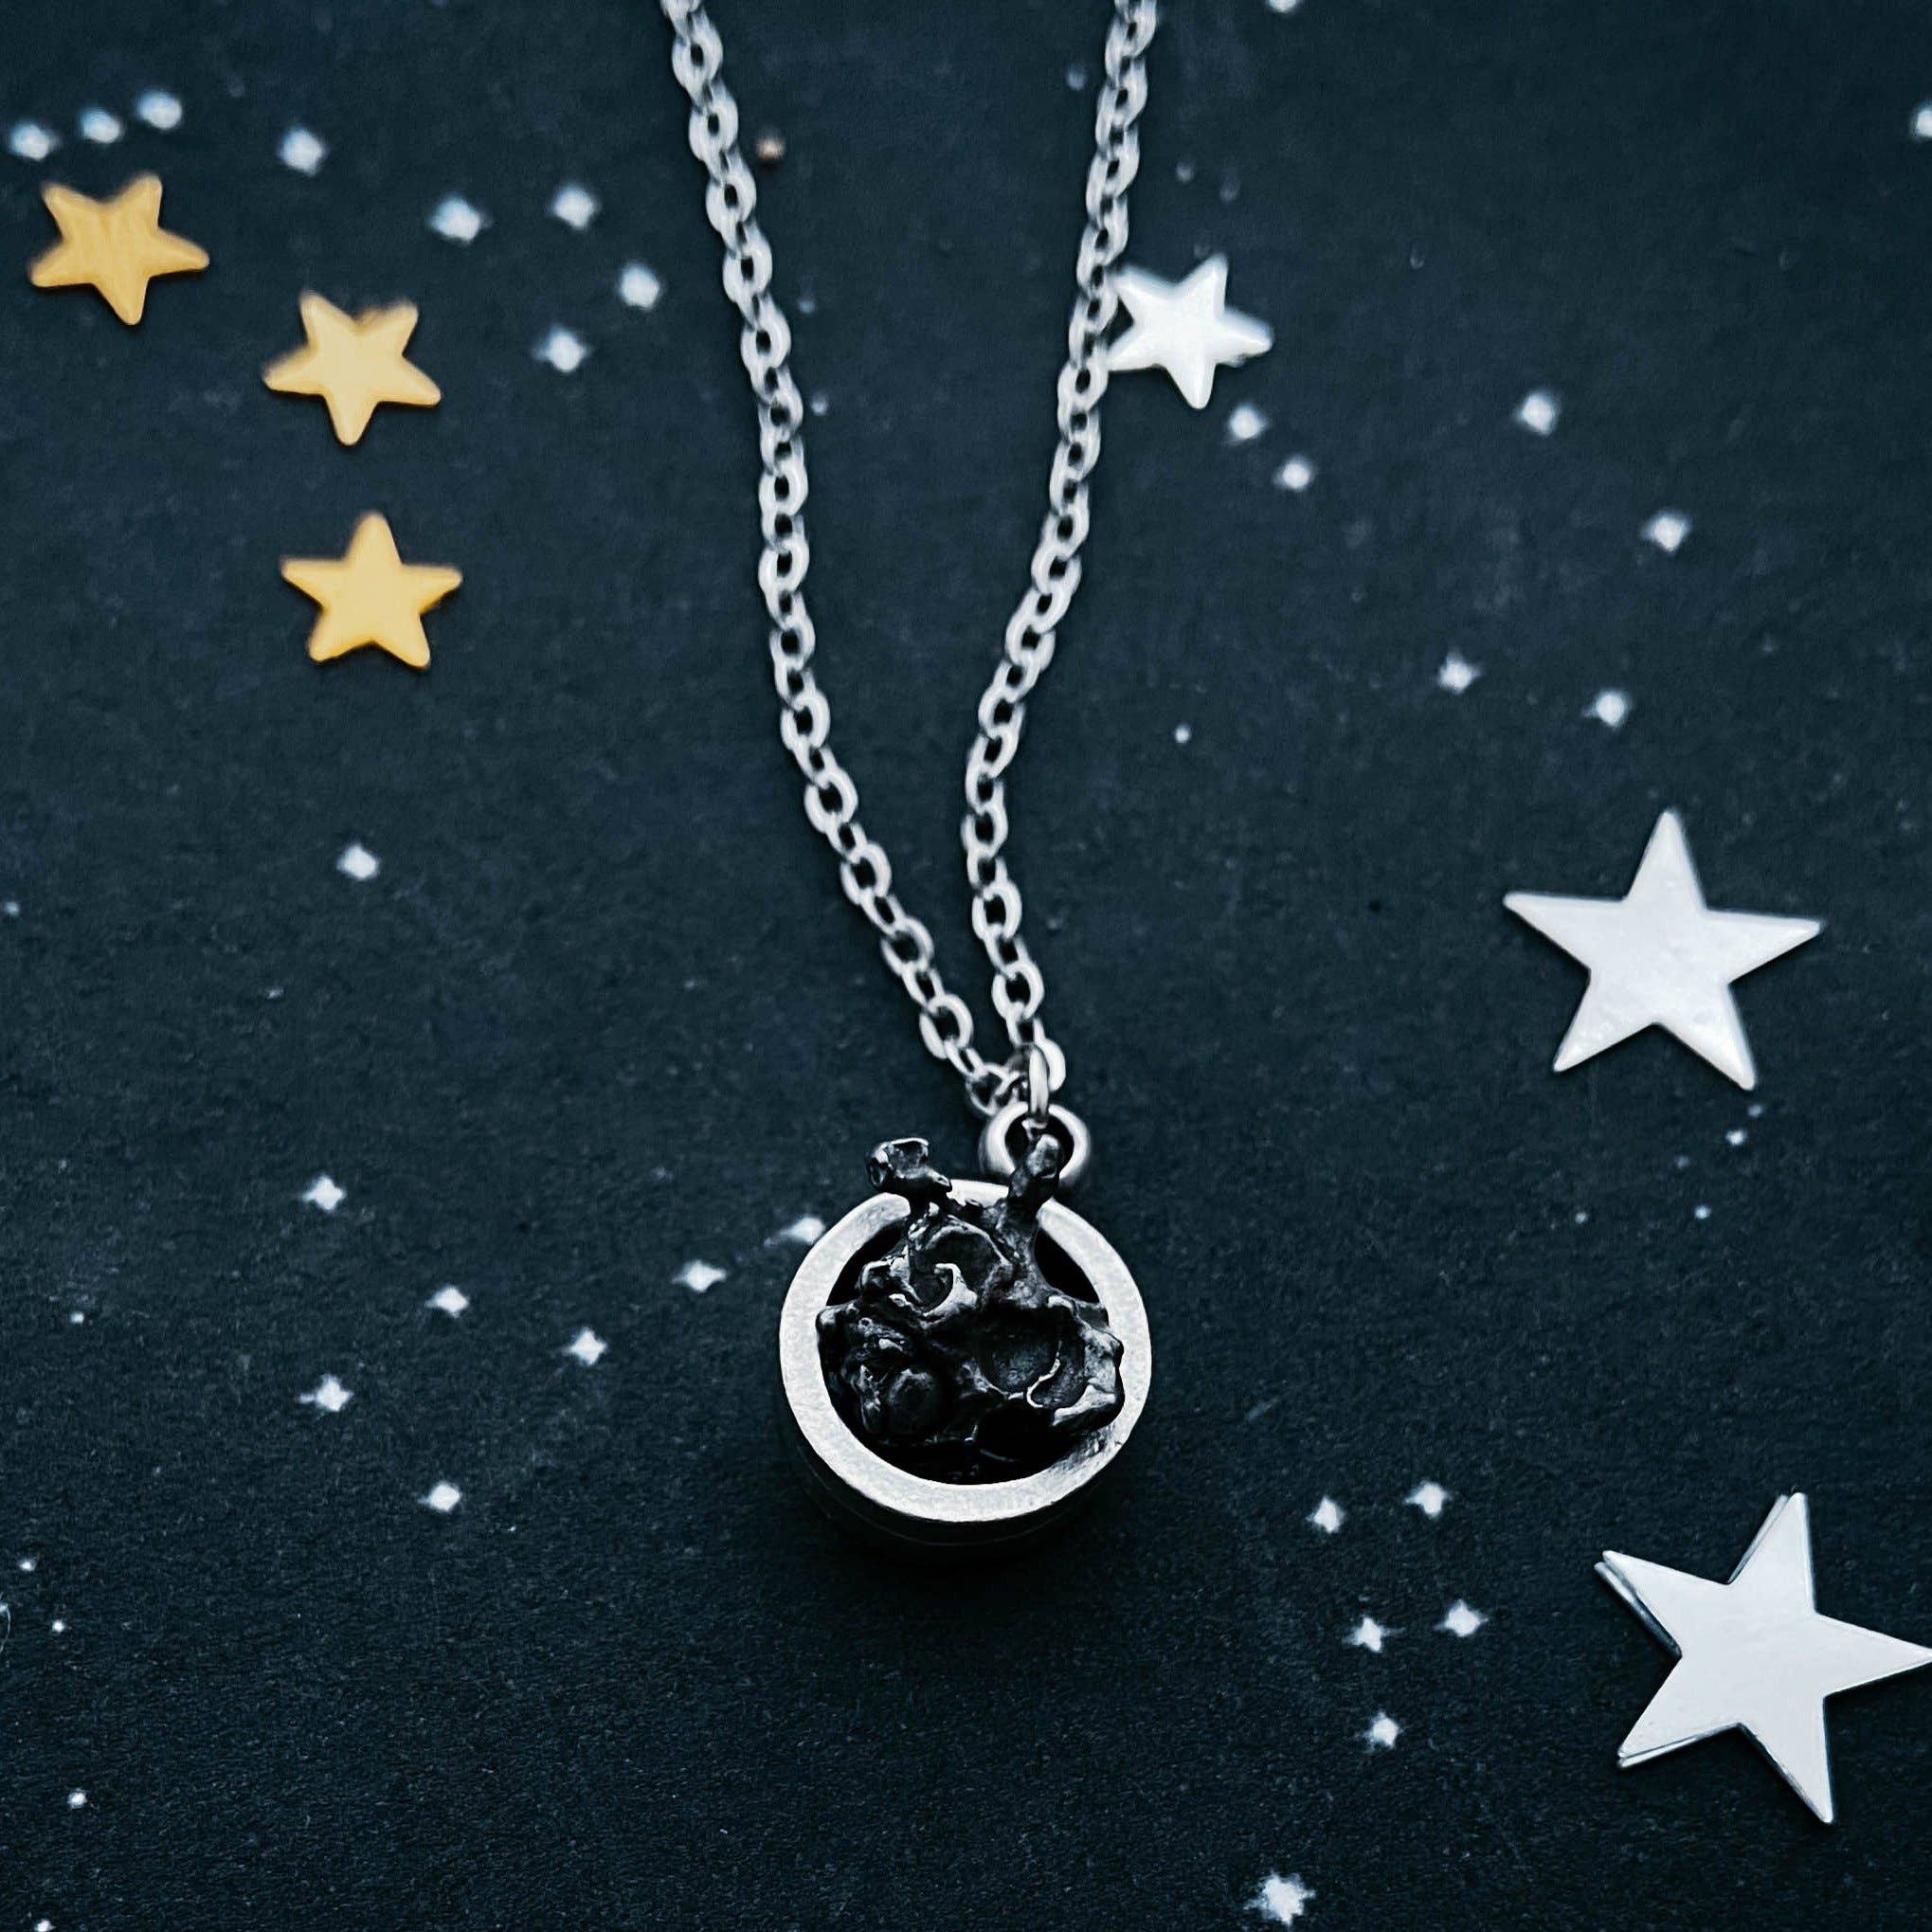 Chunky Round Authentic Meteorite Pendant Necklace - Spiral Circle